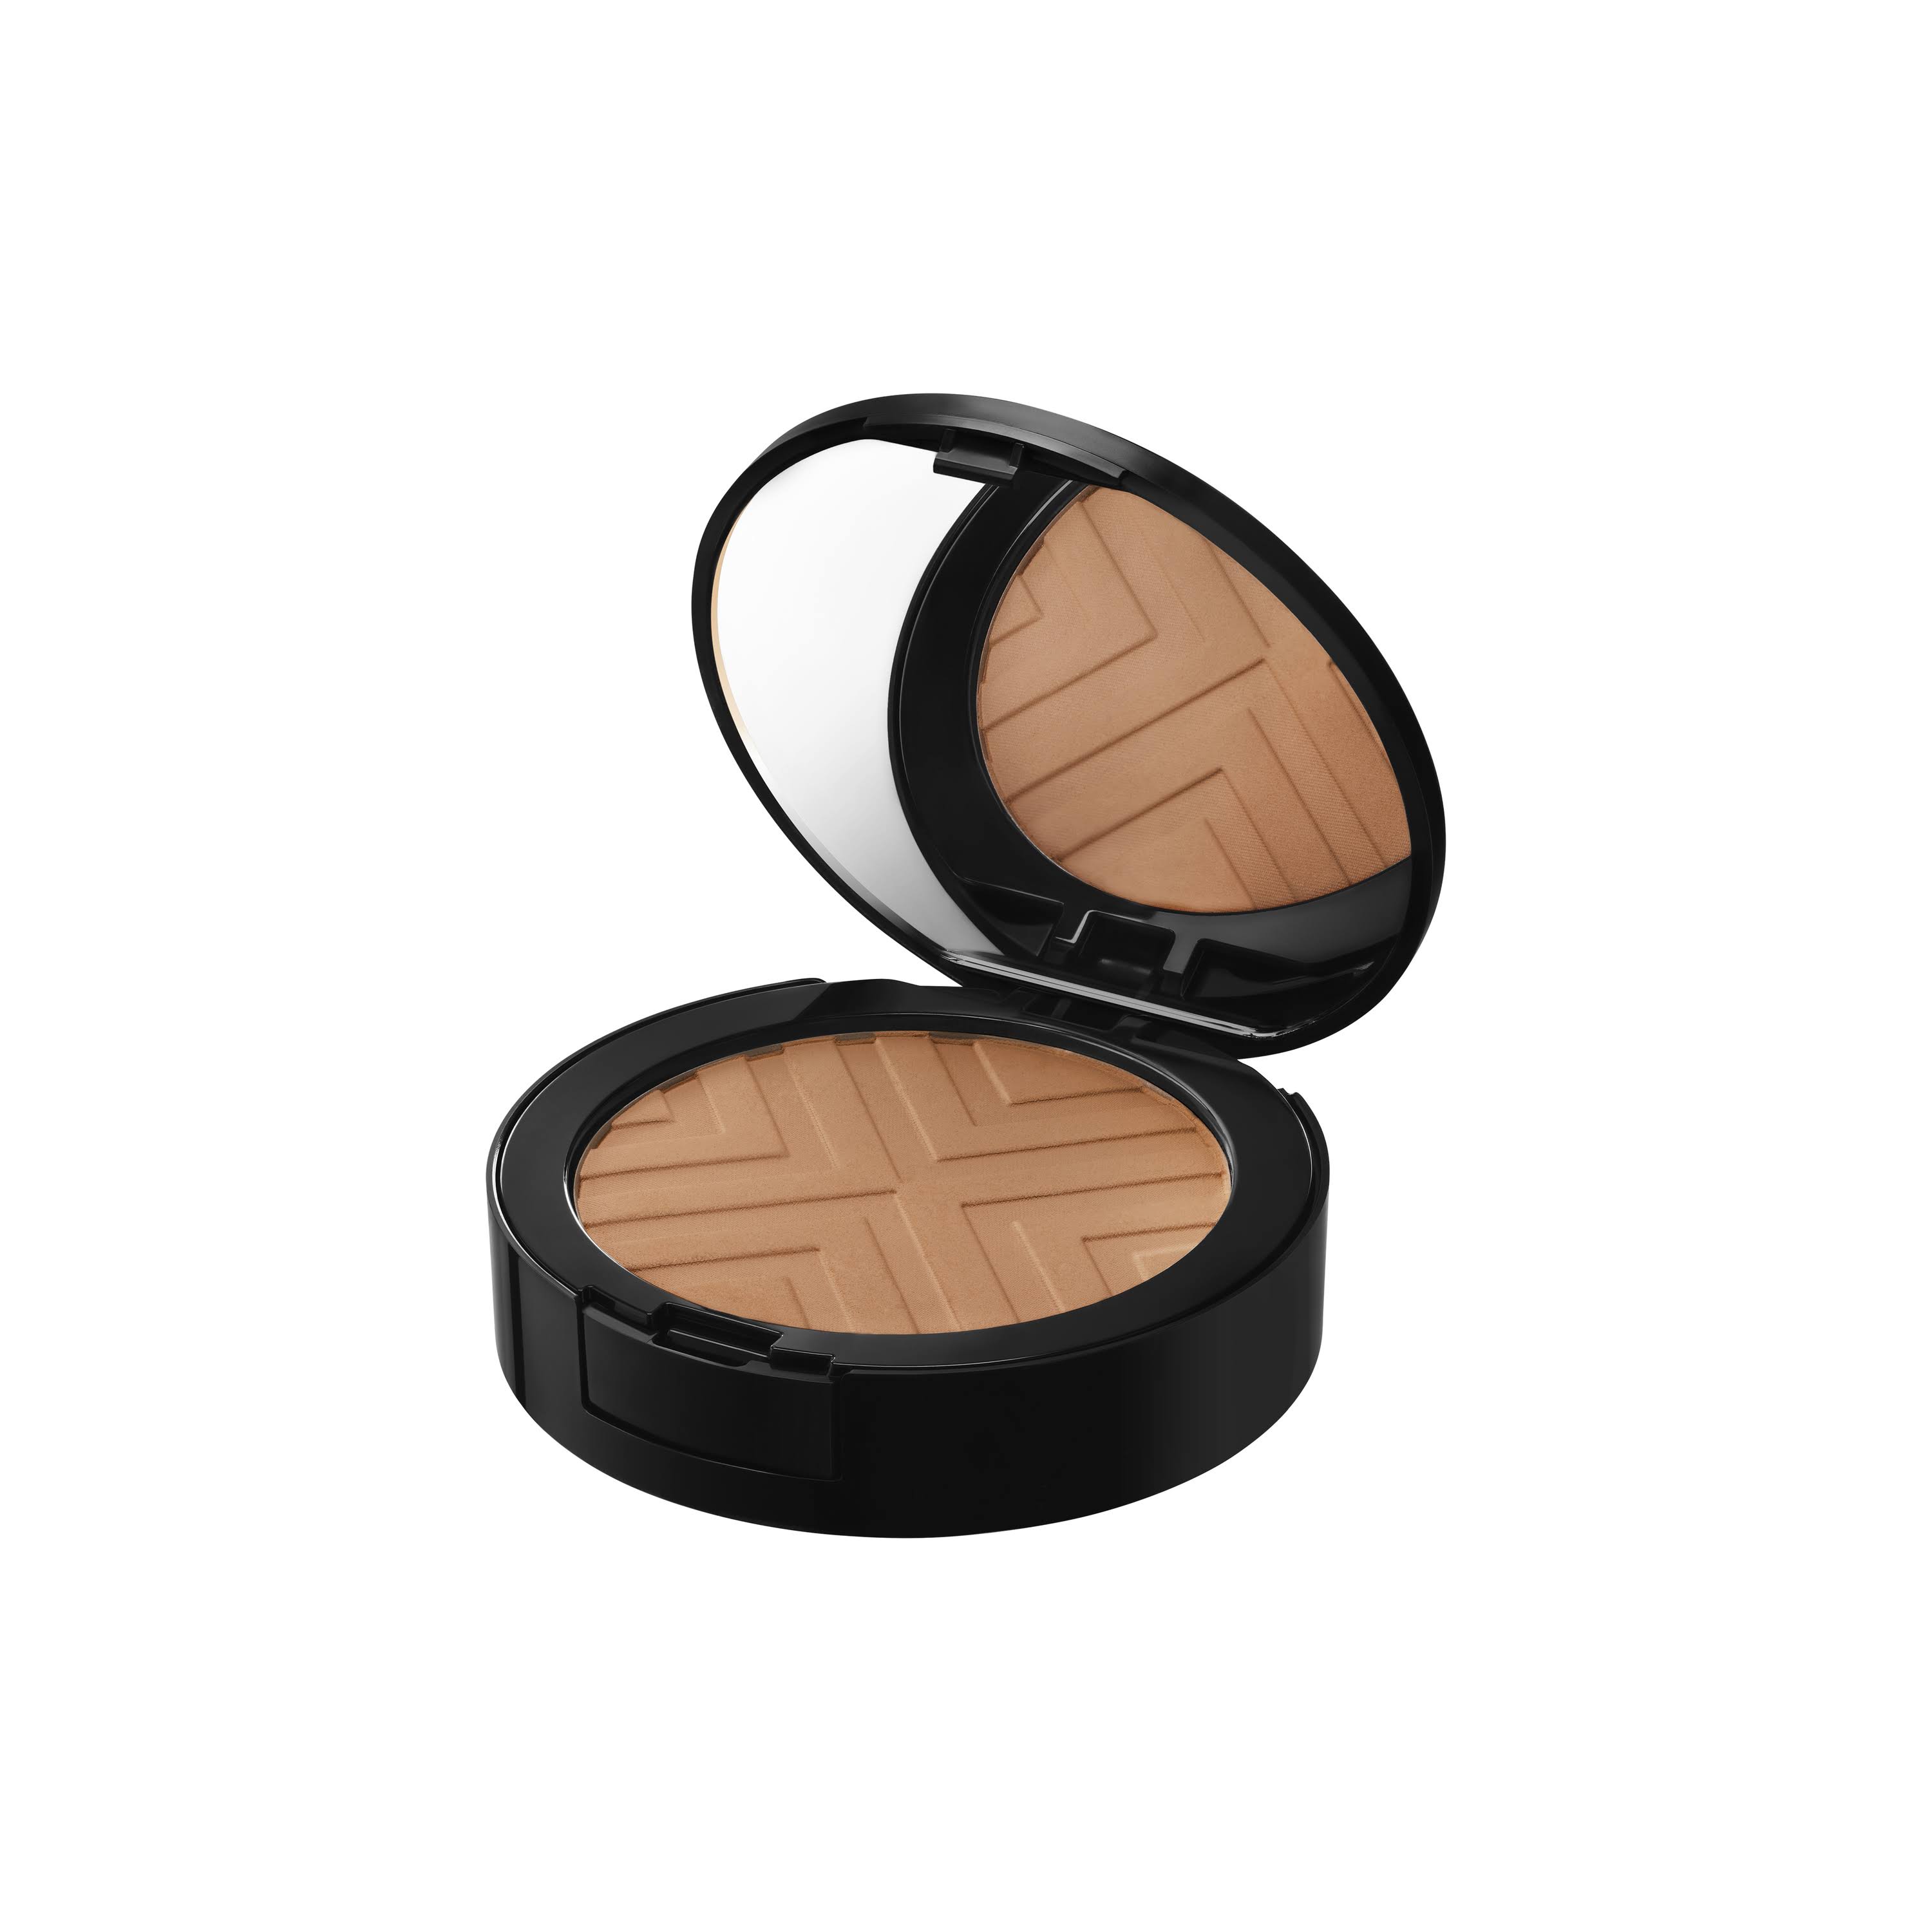 Vichy Dermablend Covermatte Compact Powder Foundation - 55 Bronze, 9.5g